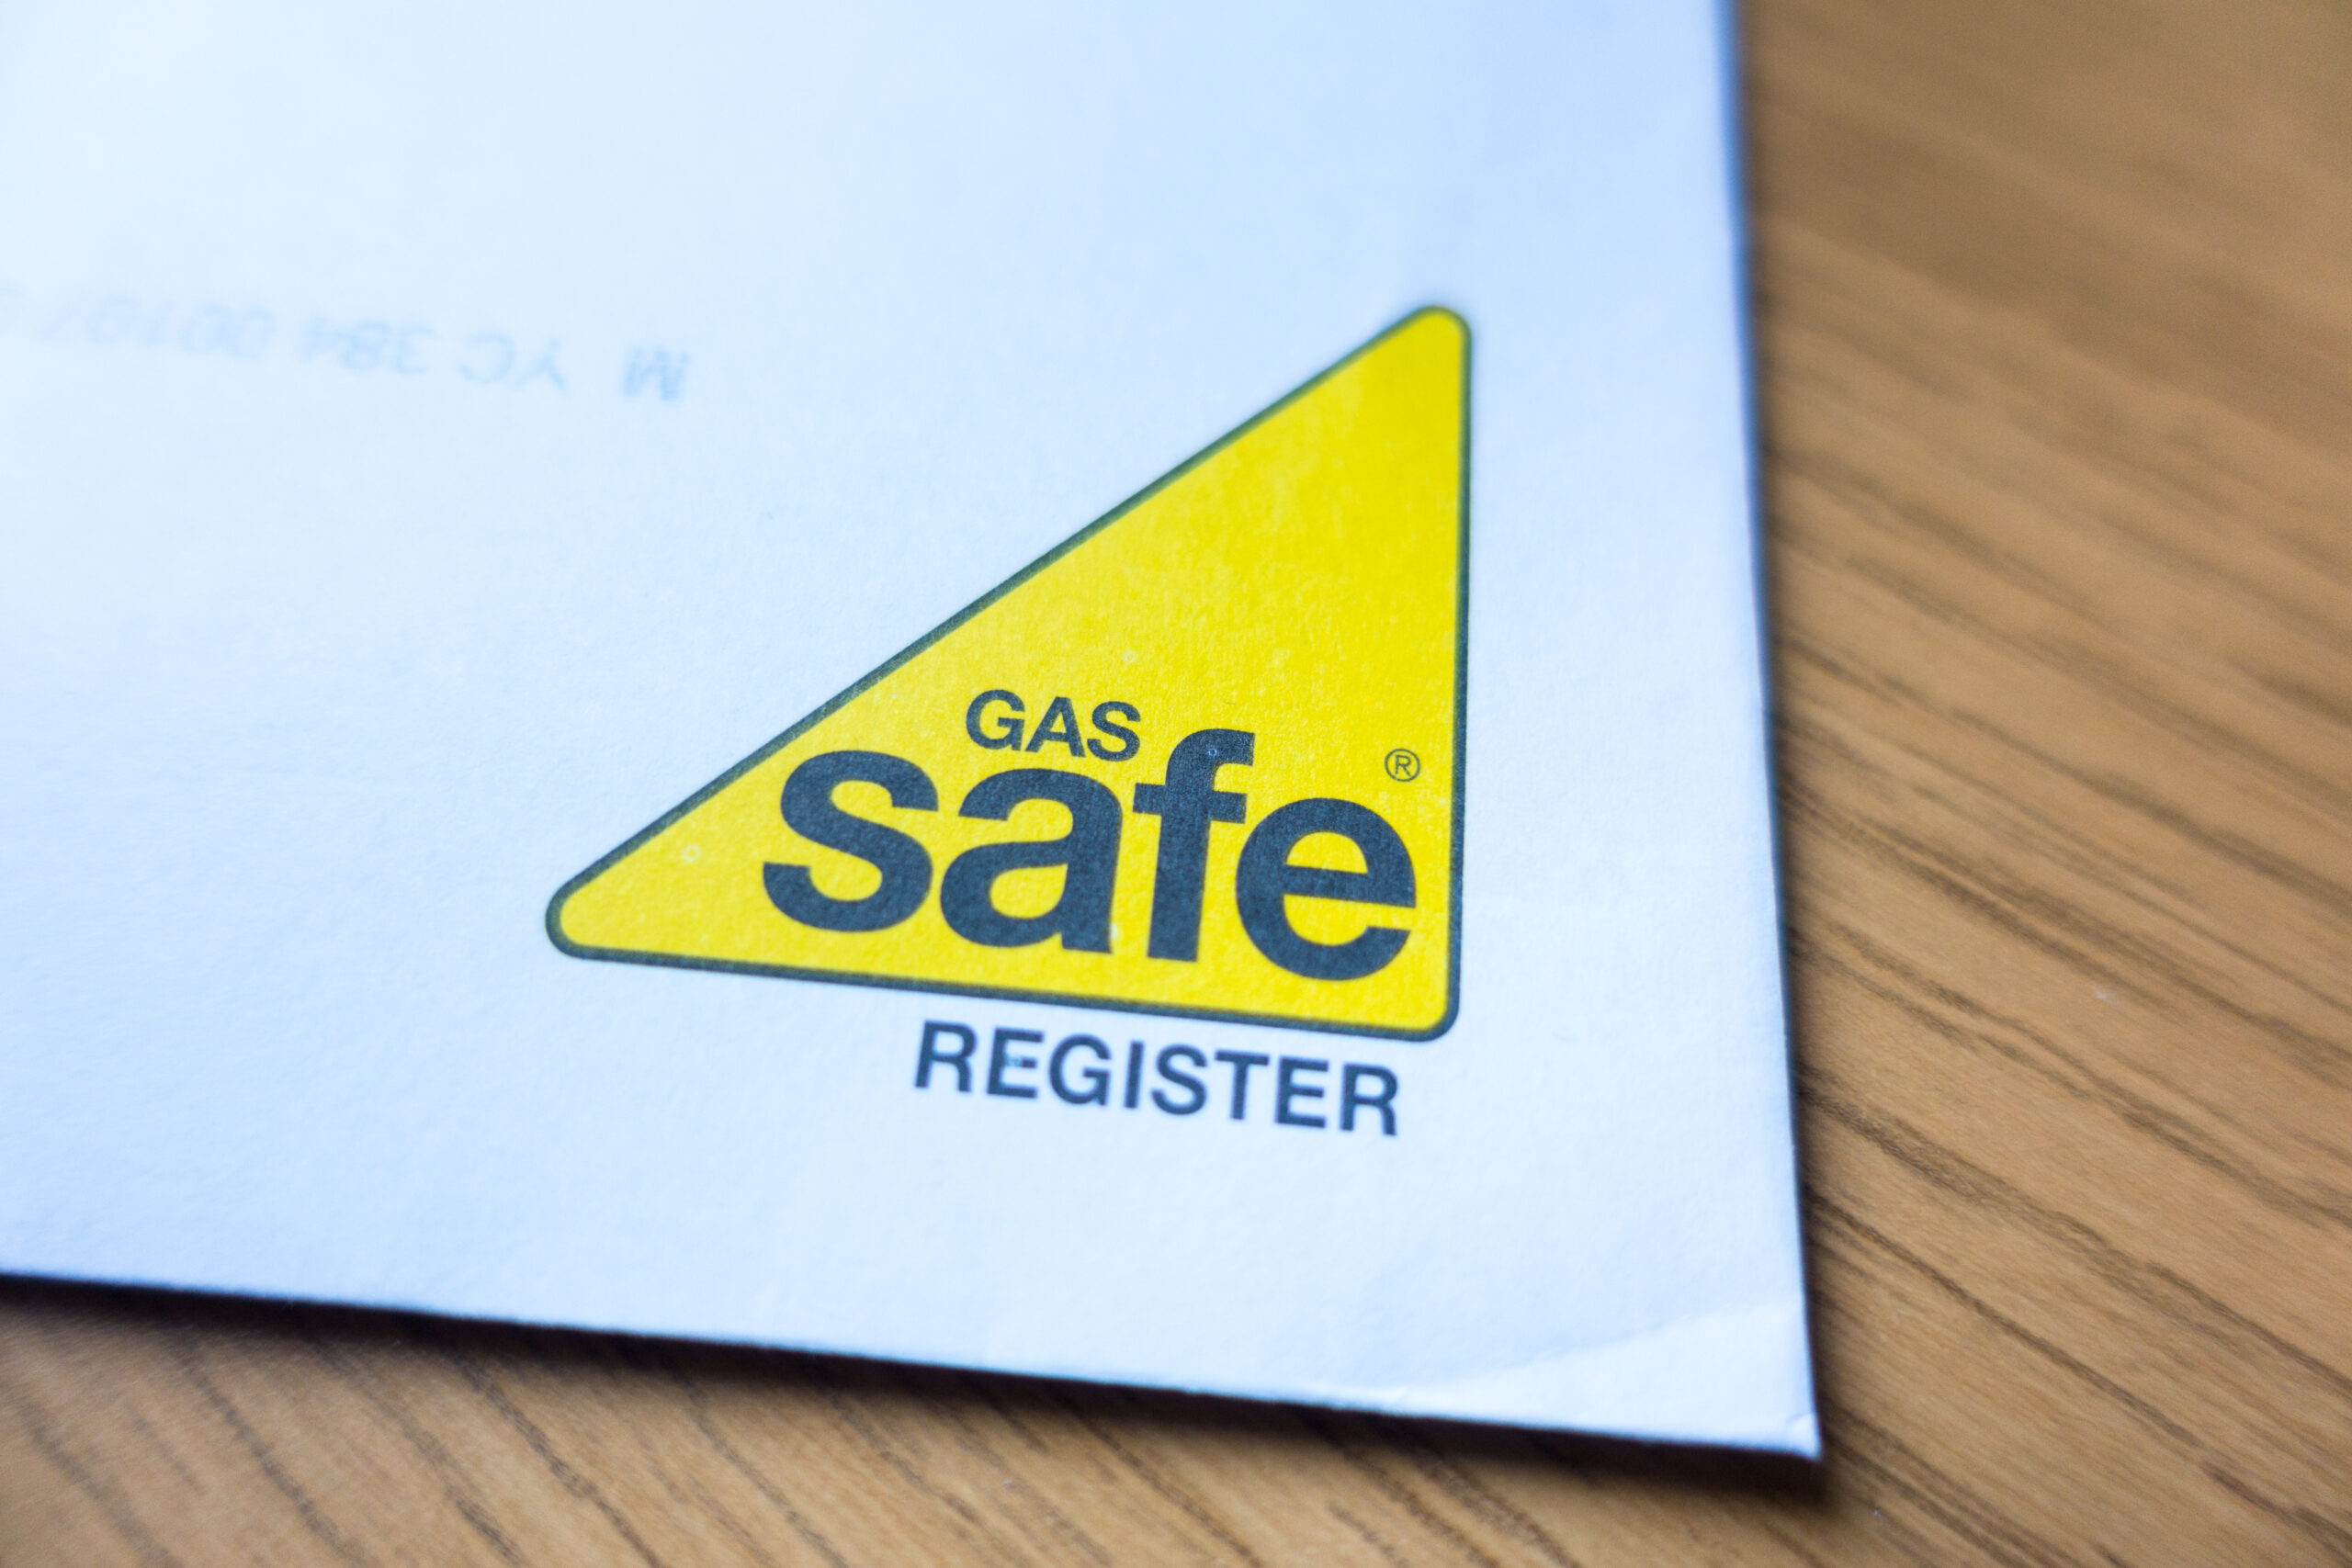 GAS Safe Register a regulatory body in the United Kingdom promoting responsible installation of Gas devices for Home and Commercial use